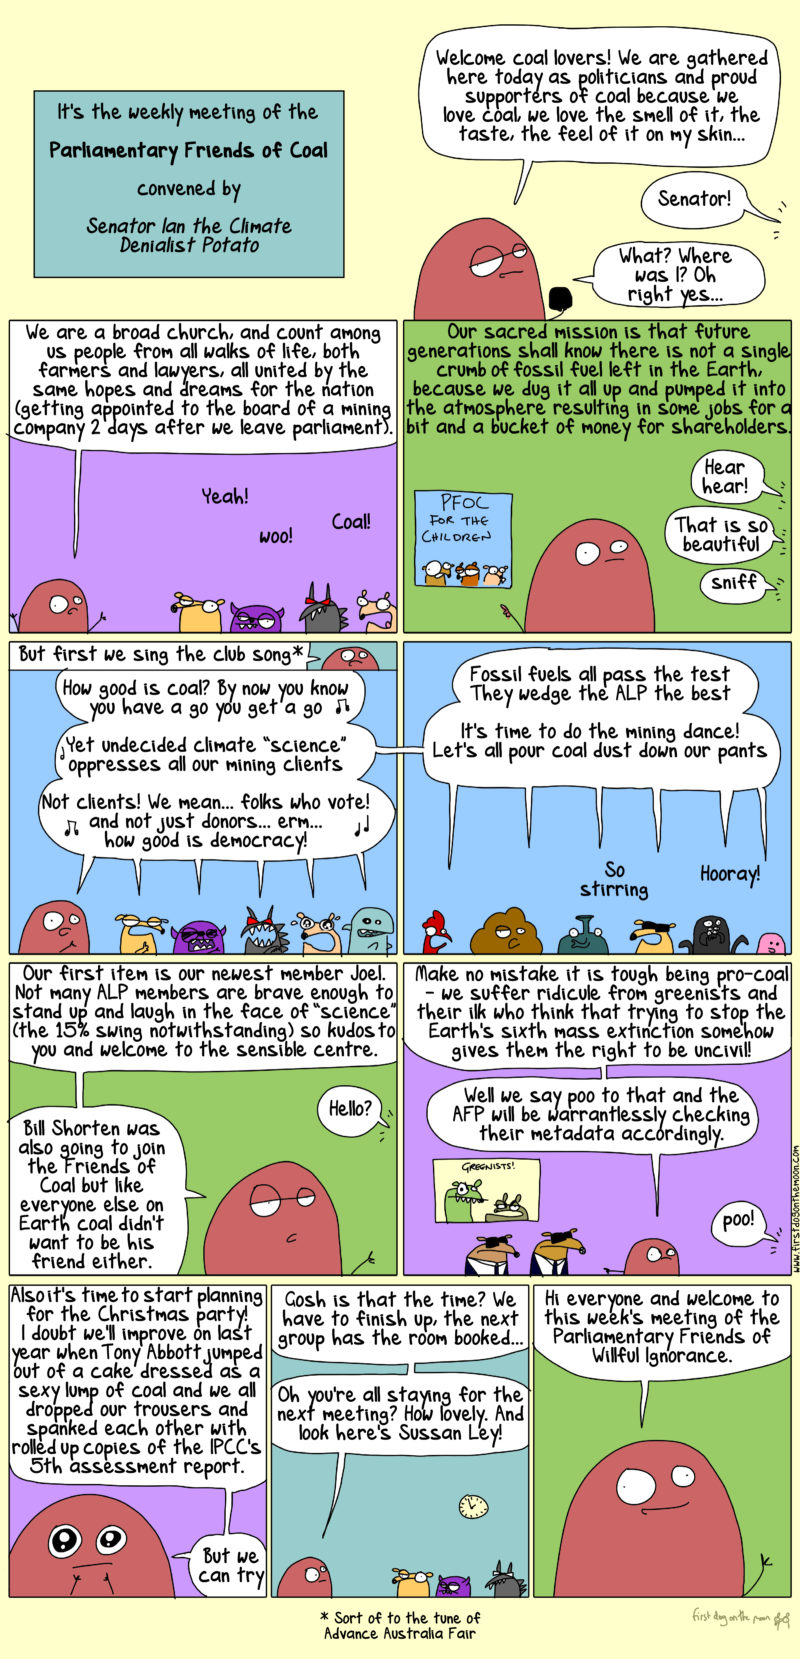 it is tough being pro-coal, just ask ian the climate denialist potato